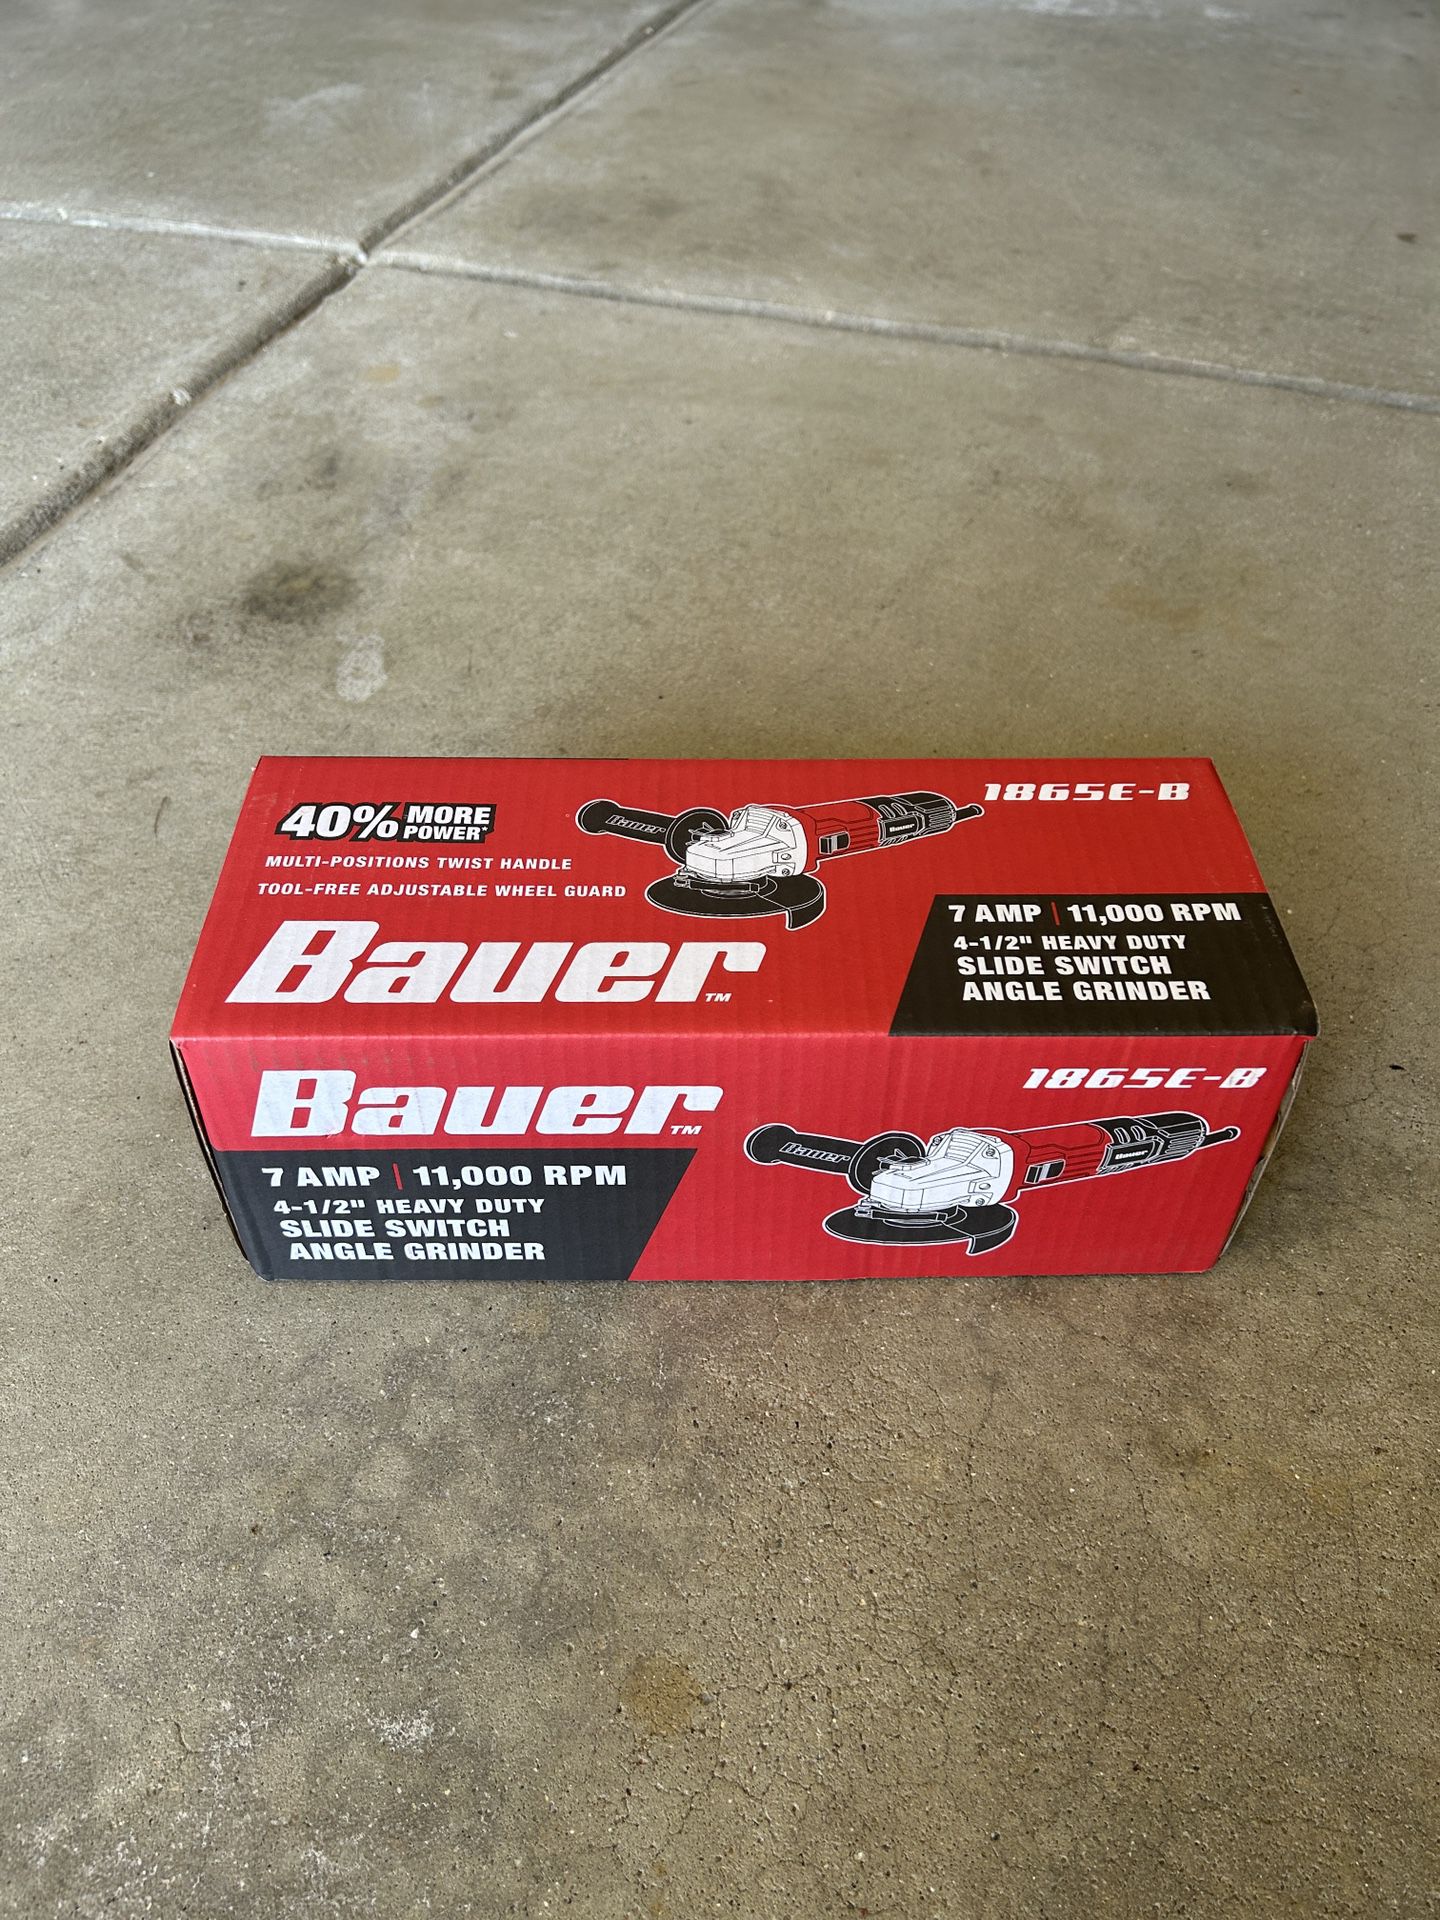 Bauer 4-1/2” Heavy Duty Slide Switch Angle Grinder - New In Box